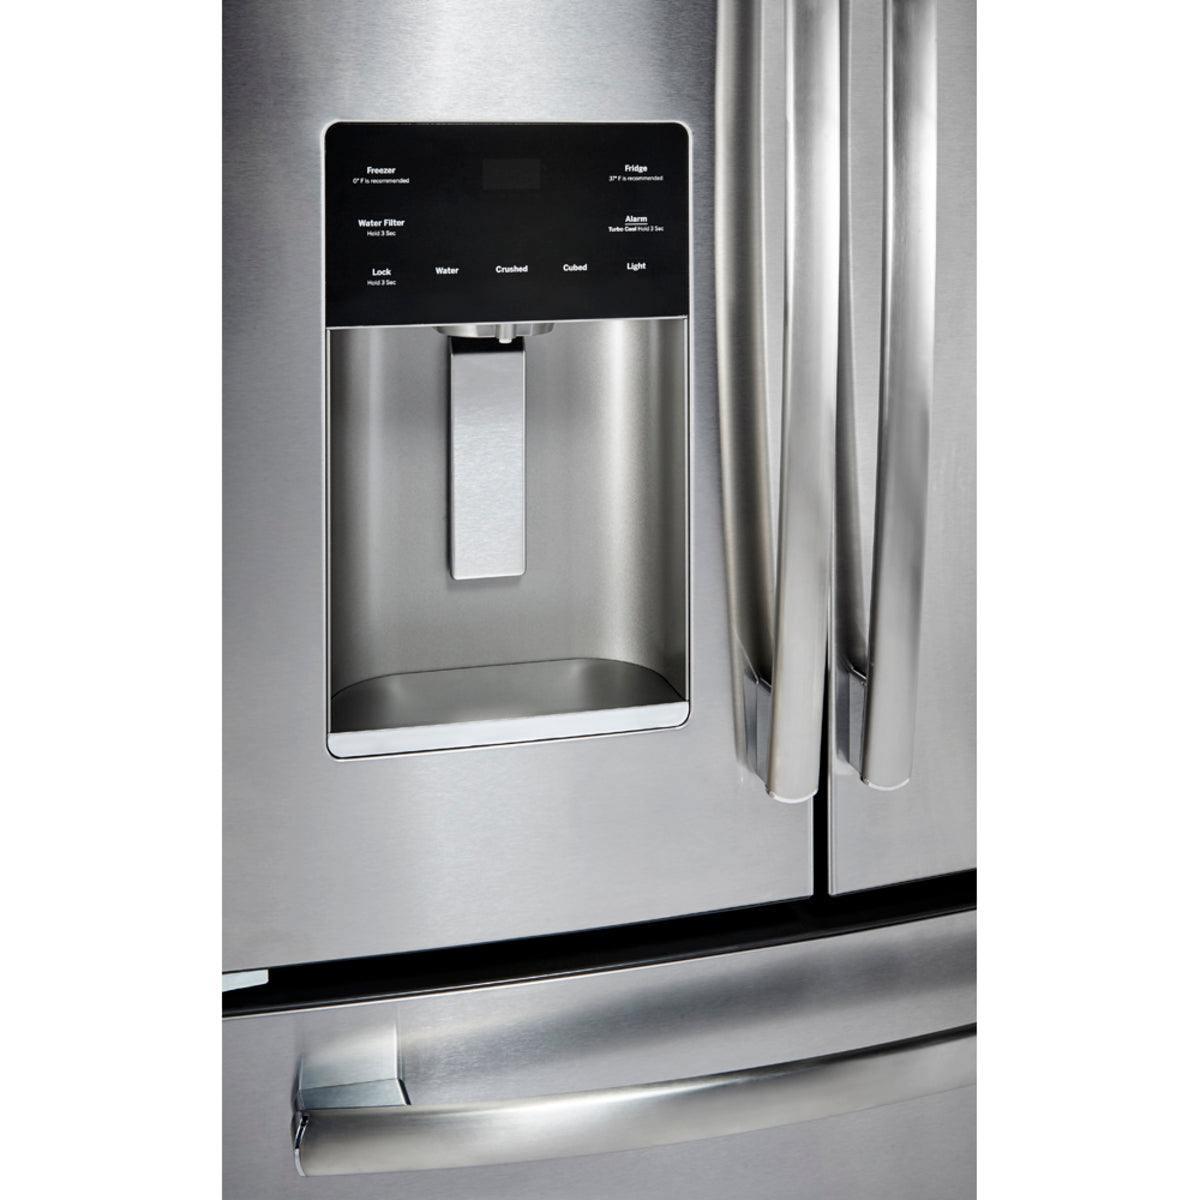 GE Profile - 32.75 Inch 17.5 cu. ft French Door Refrigerator in Stainless - PYE18HYRKFS